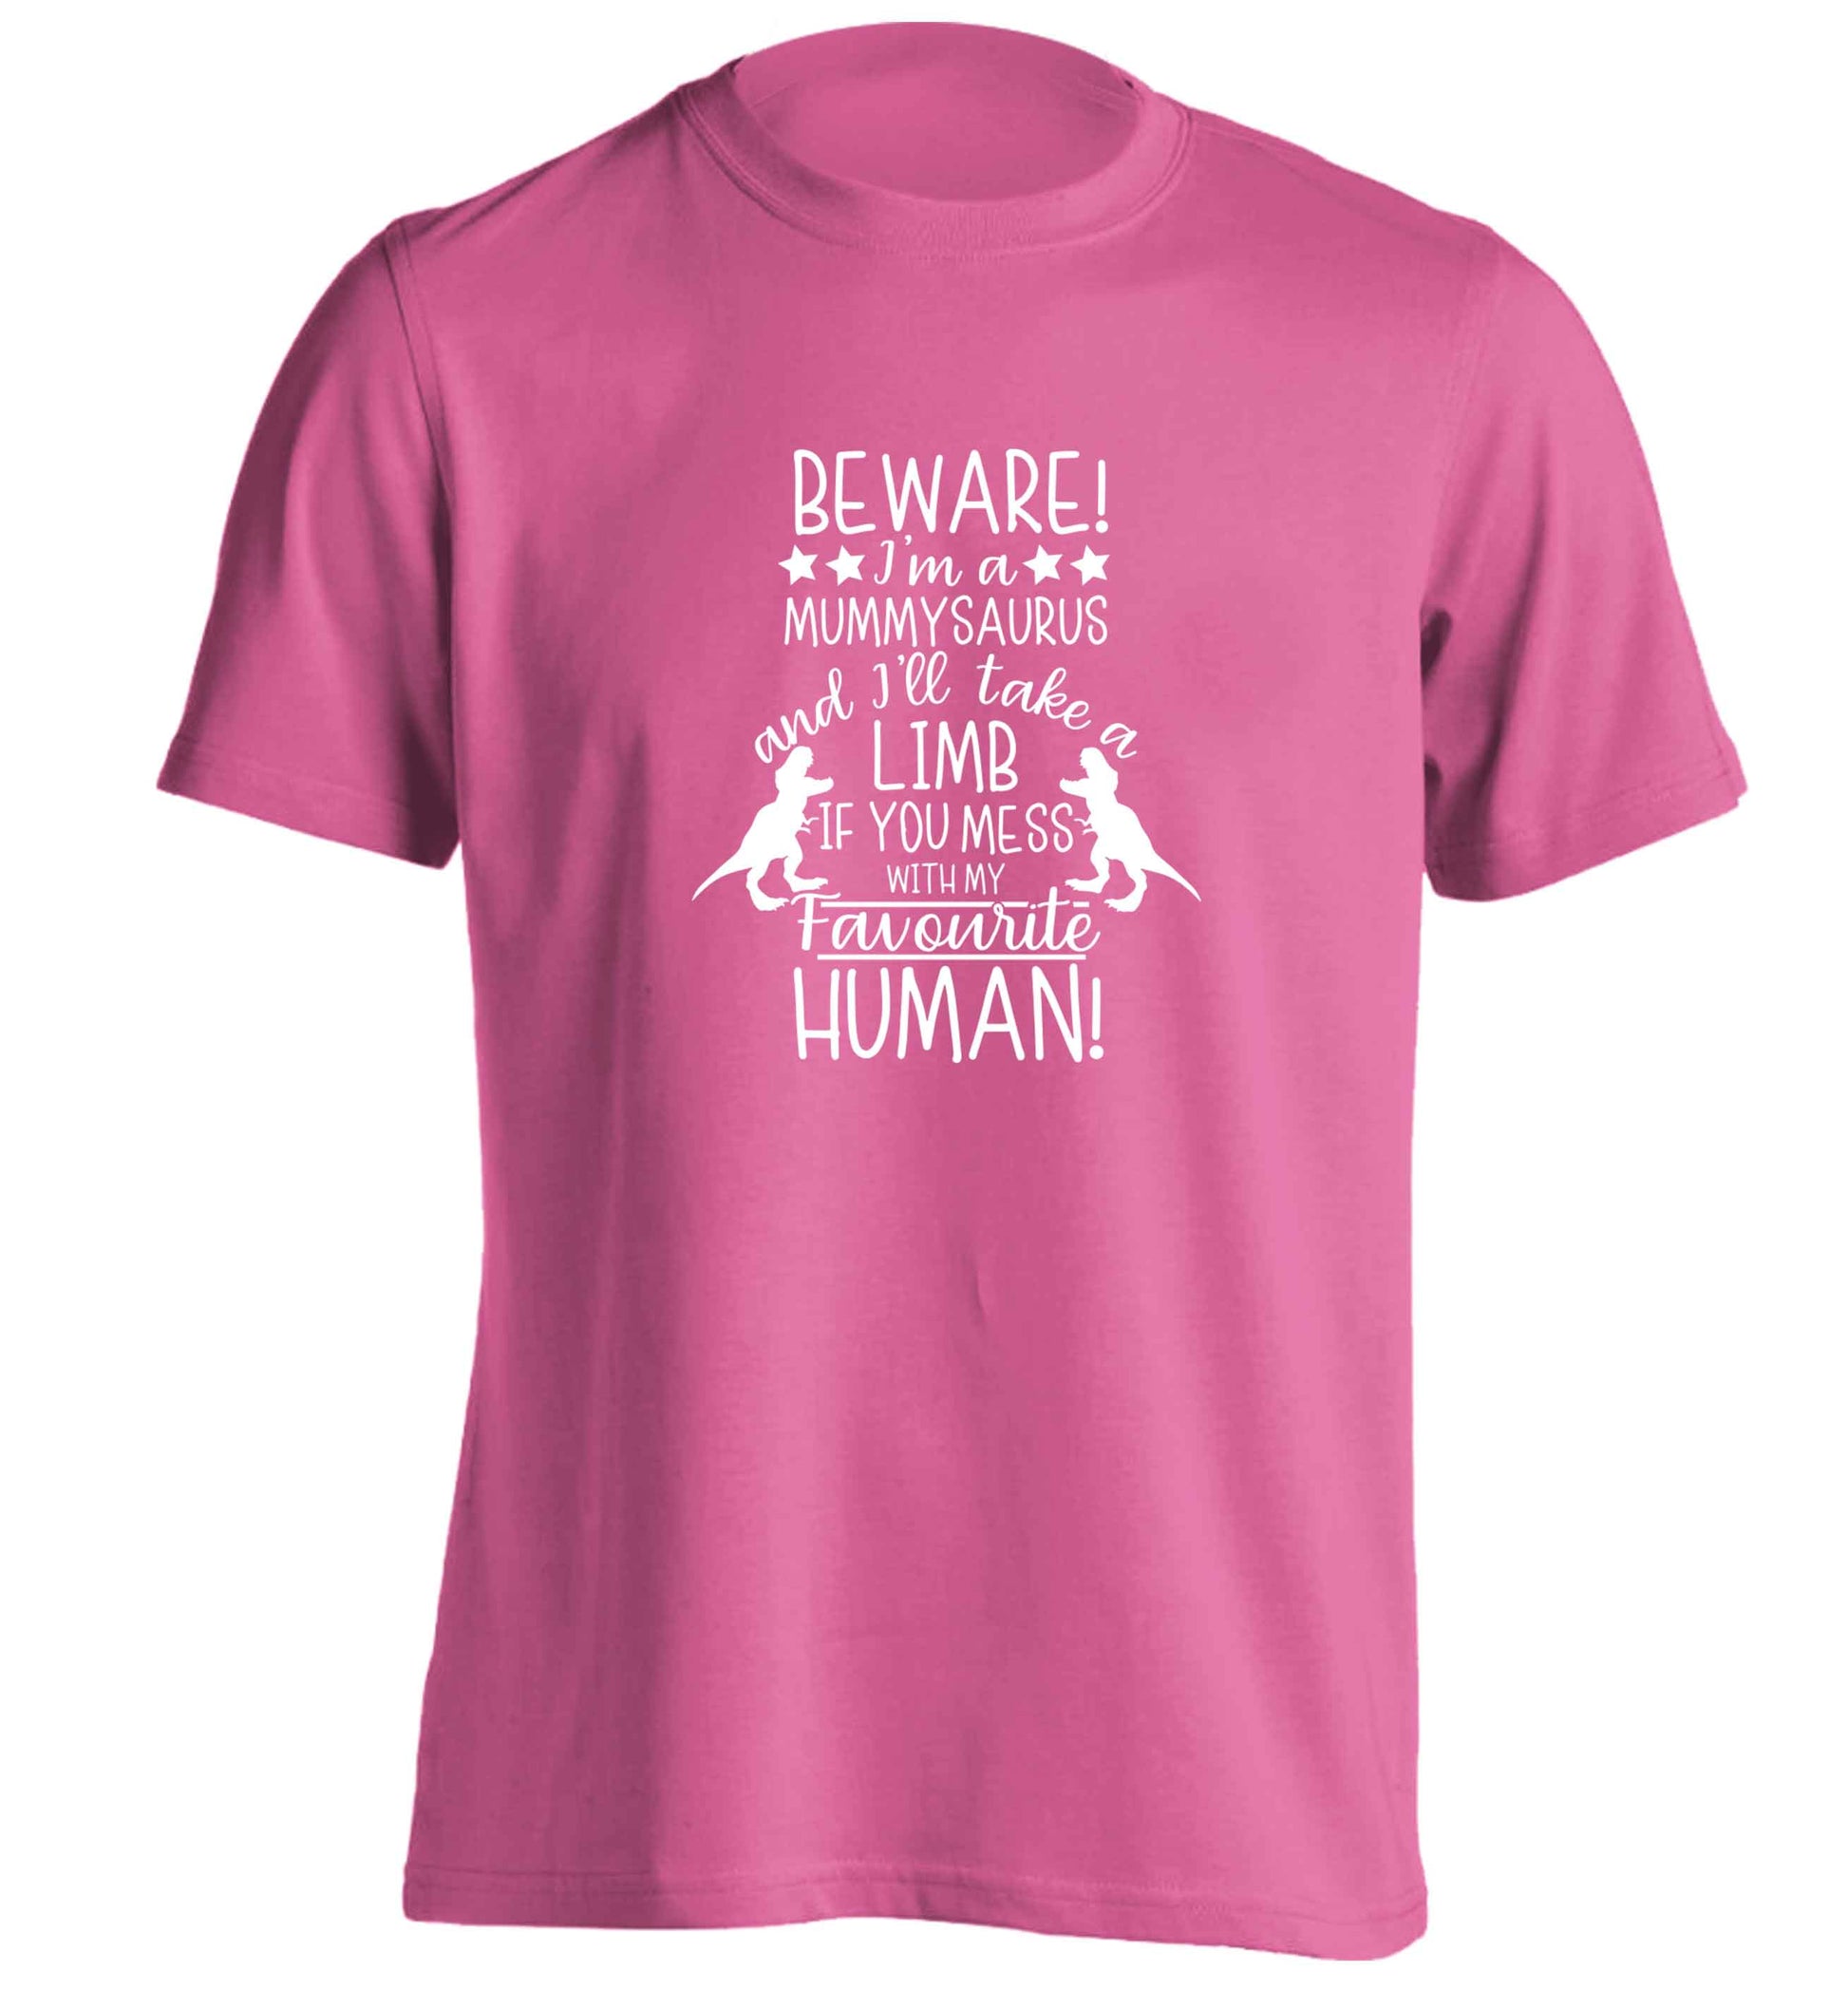 Perfect gift for any protective mummysaurus! Beware I'm a mummysaurus and I'll take a limb if you mess with my favourite human adults unisex pink Tshirt 2XL